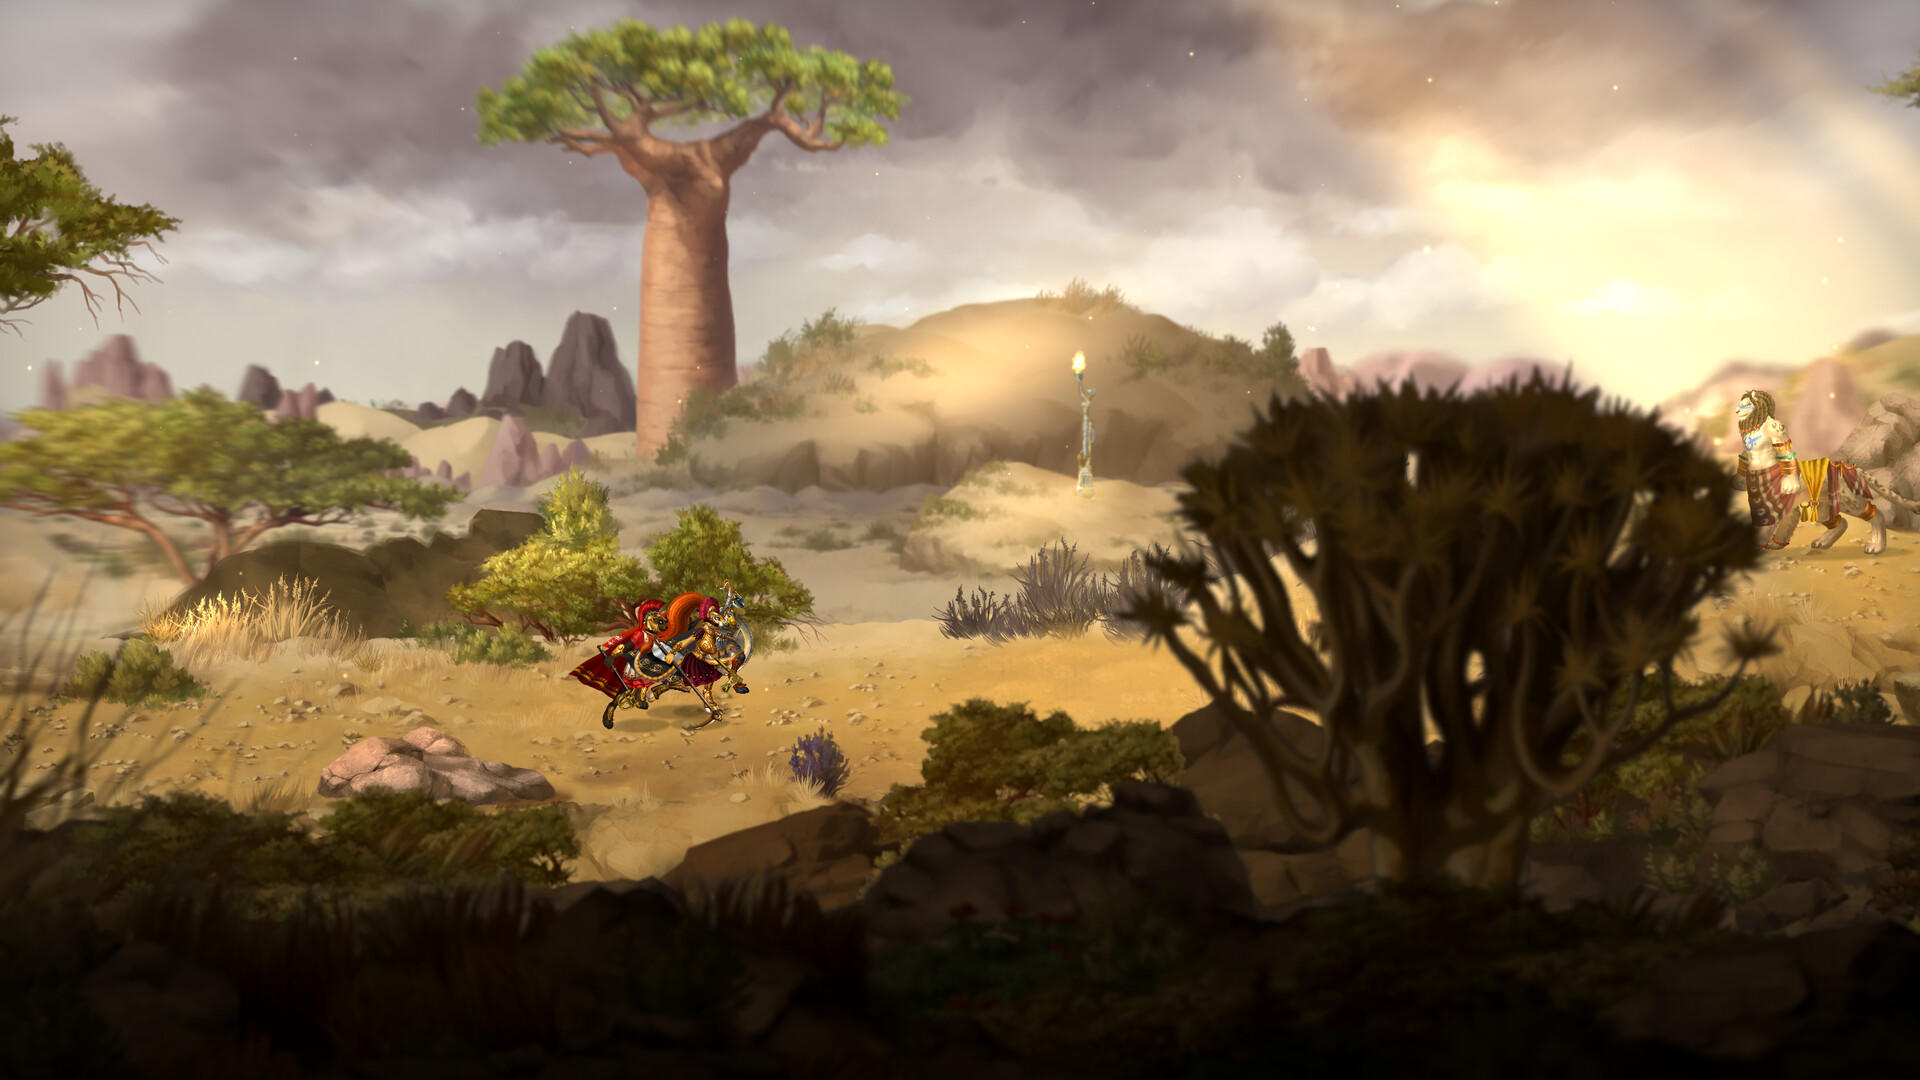 Screenshot 1 of Paws on the Sand: Lionesy Sins 